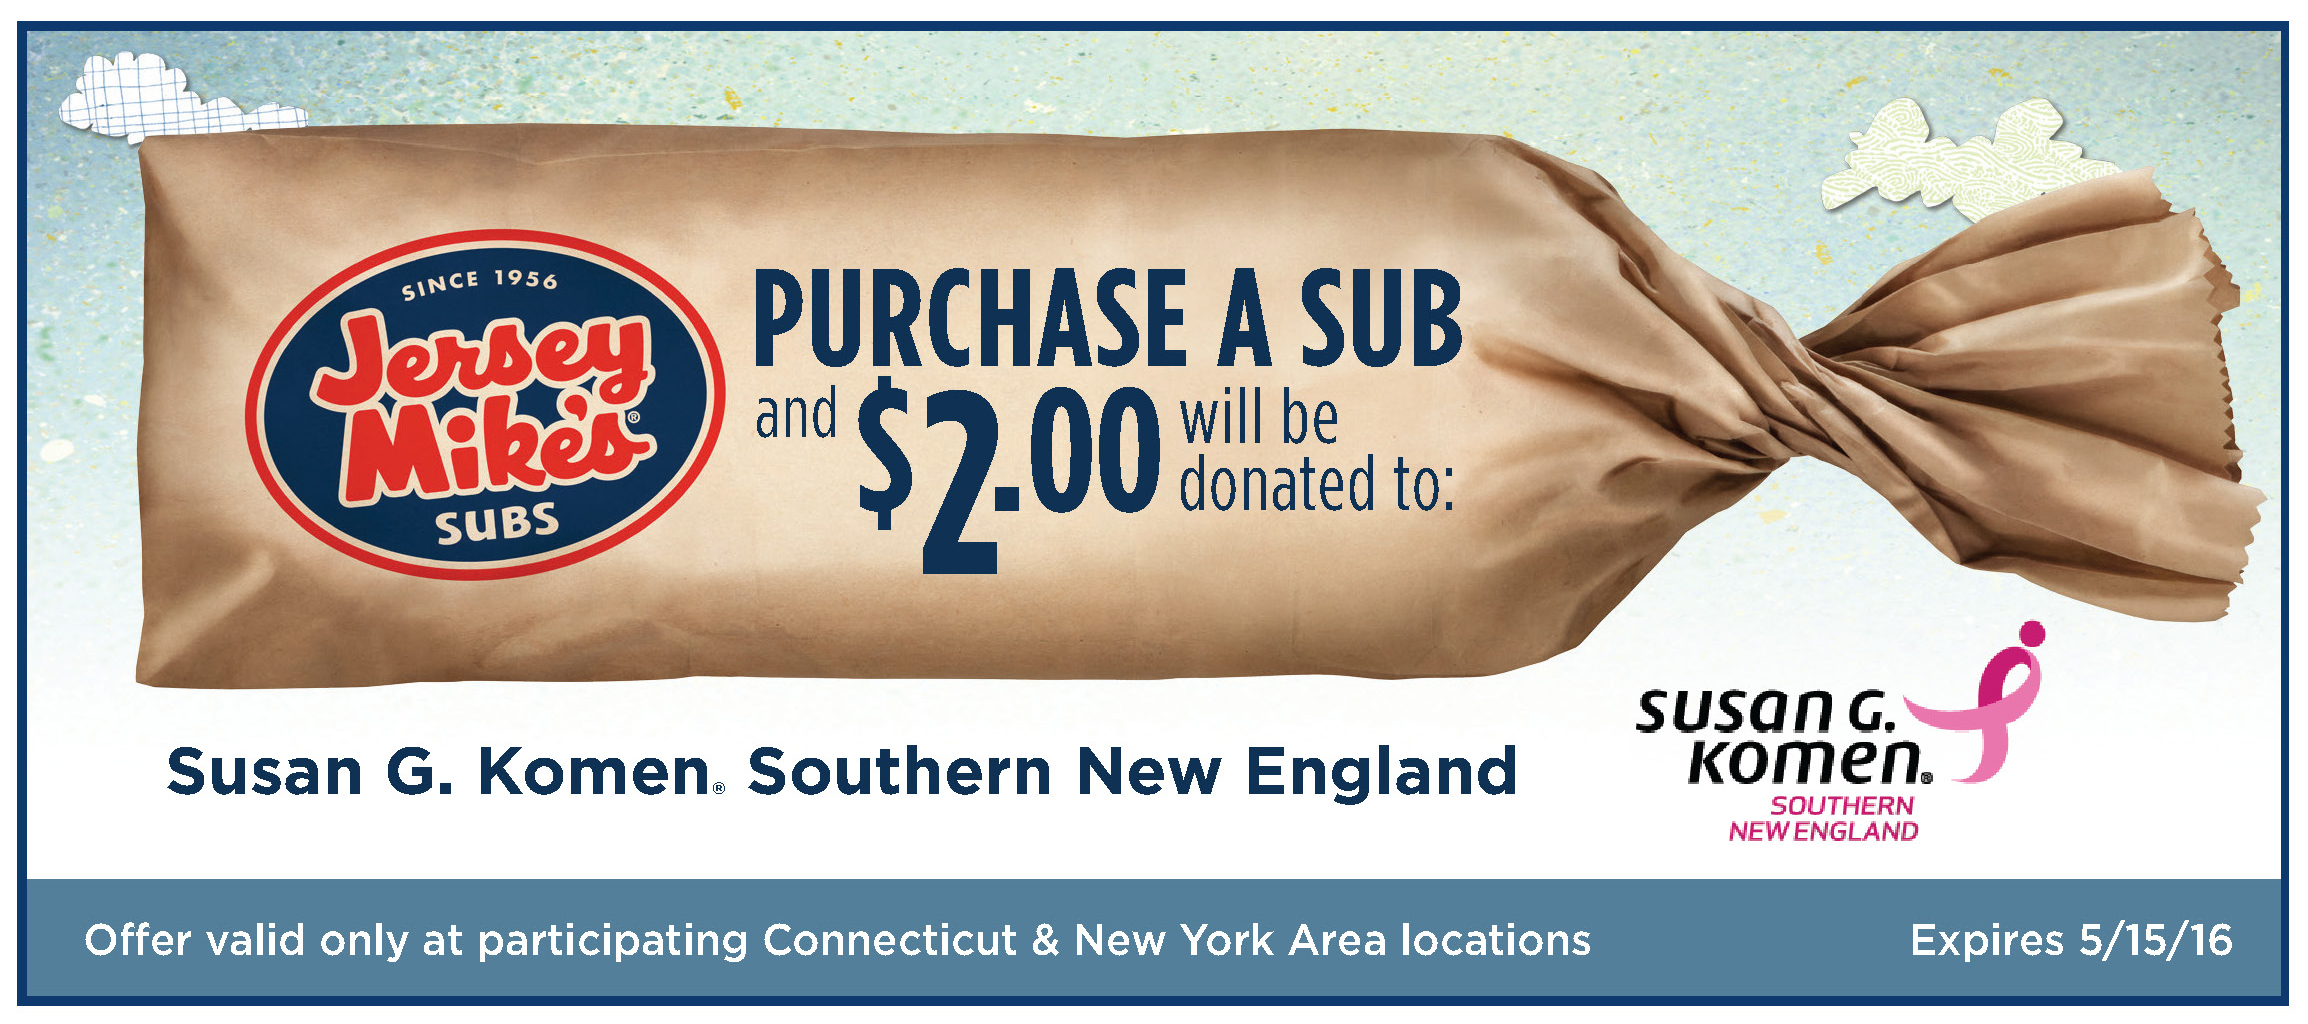 Jersey Mike’s Subs Shops to Donate 2 to Susan G. Komen for Each Sub